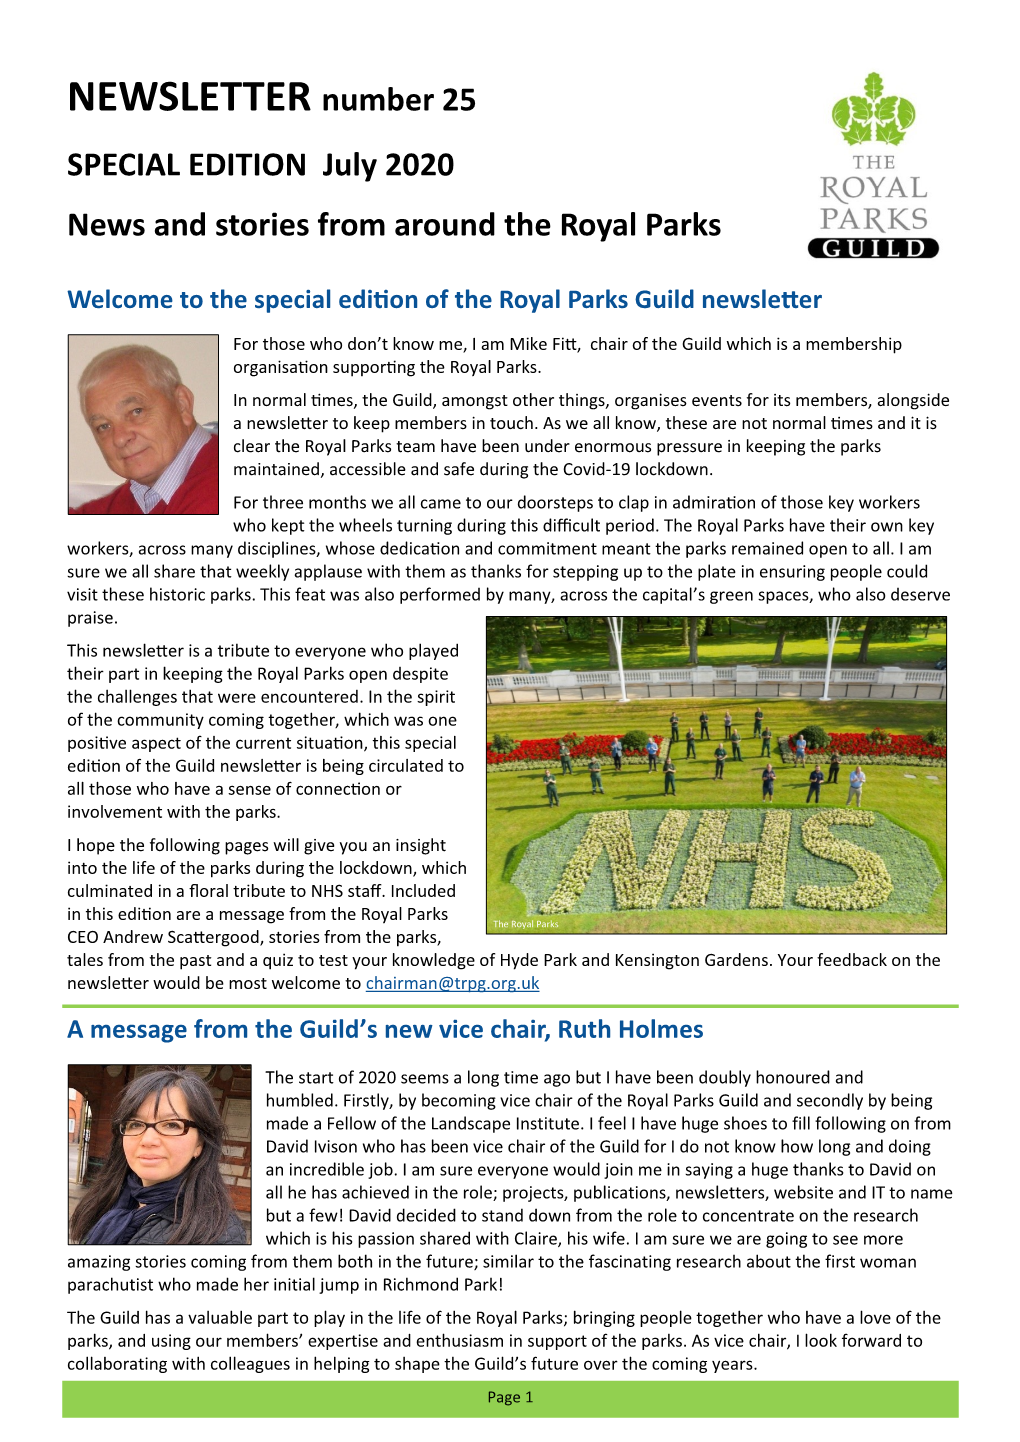 NEWSLETTER Number 25 SPECIAL EDITION July 2020 News and Stories from Around the Royal Parks